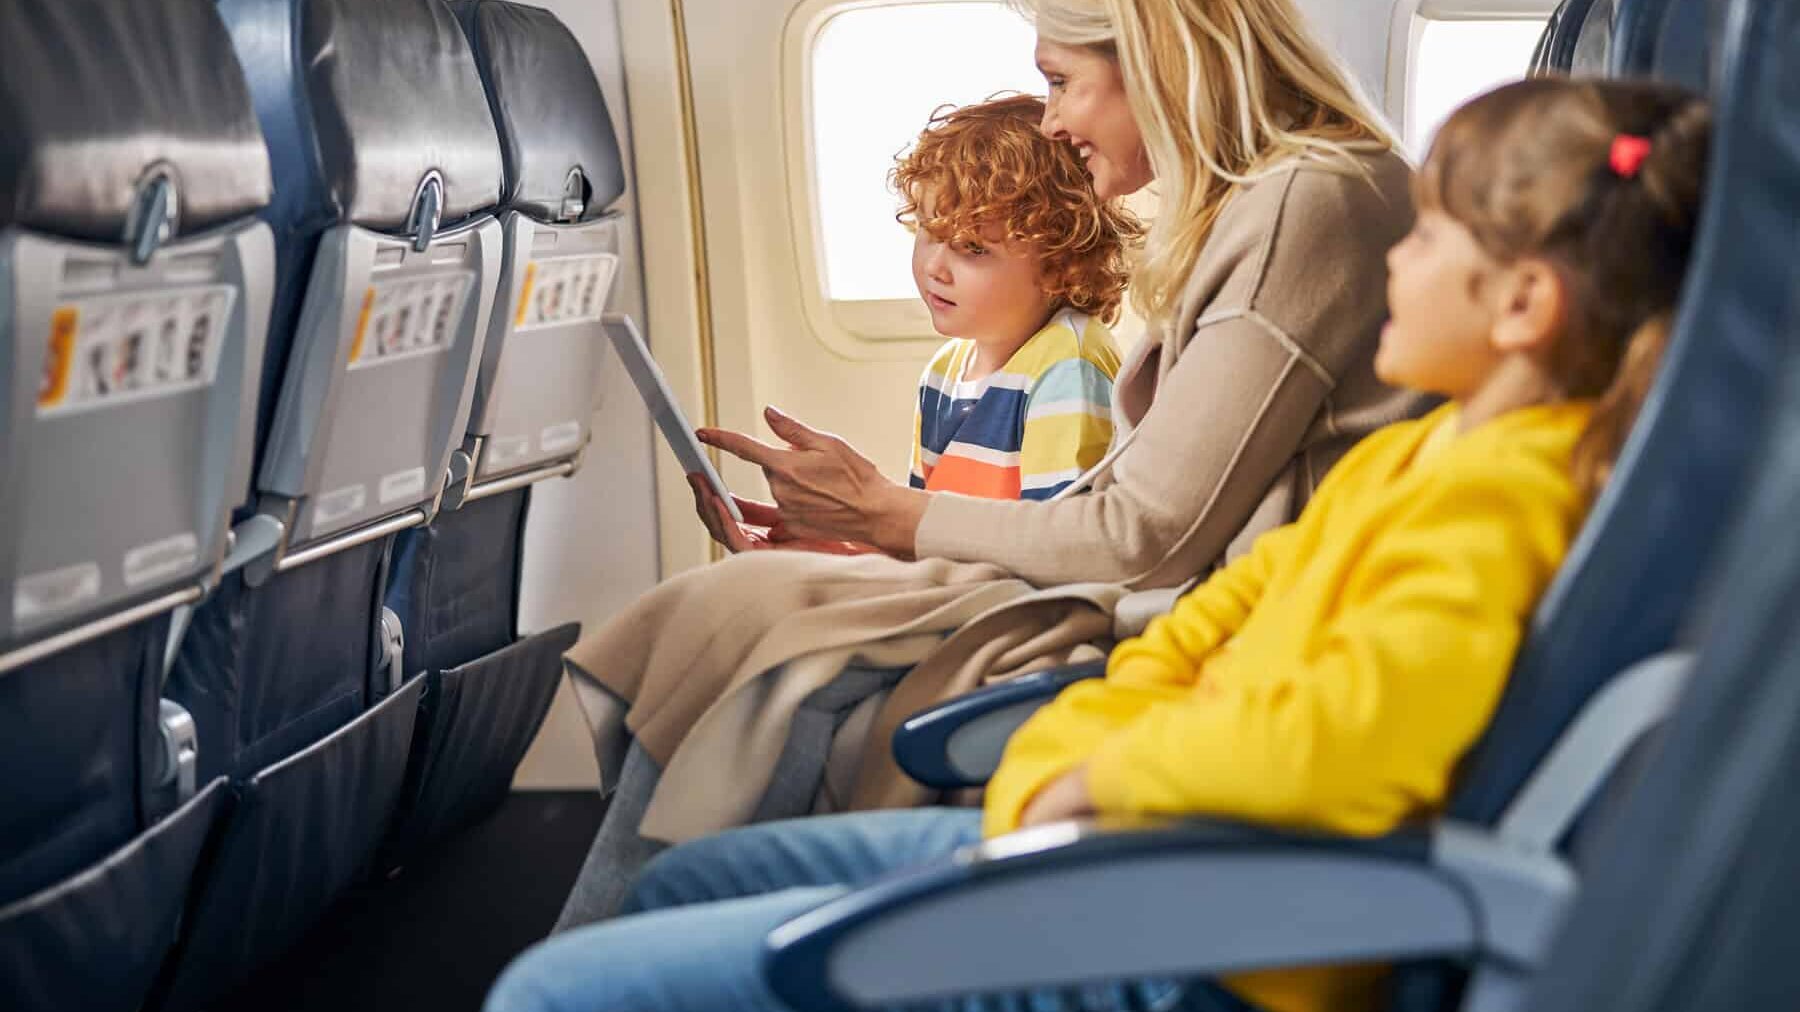 kids inside a plane showing a tablet to a boy